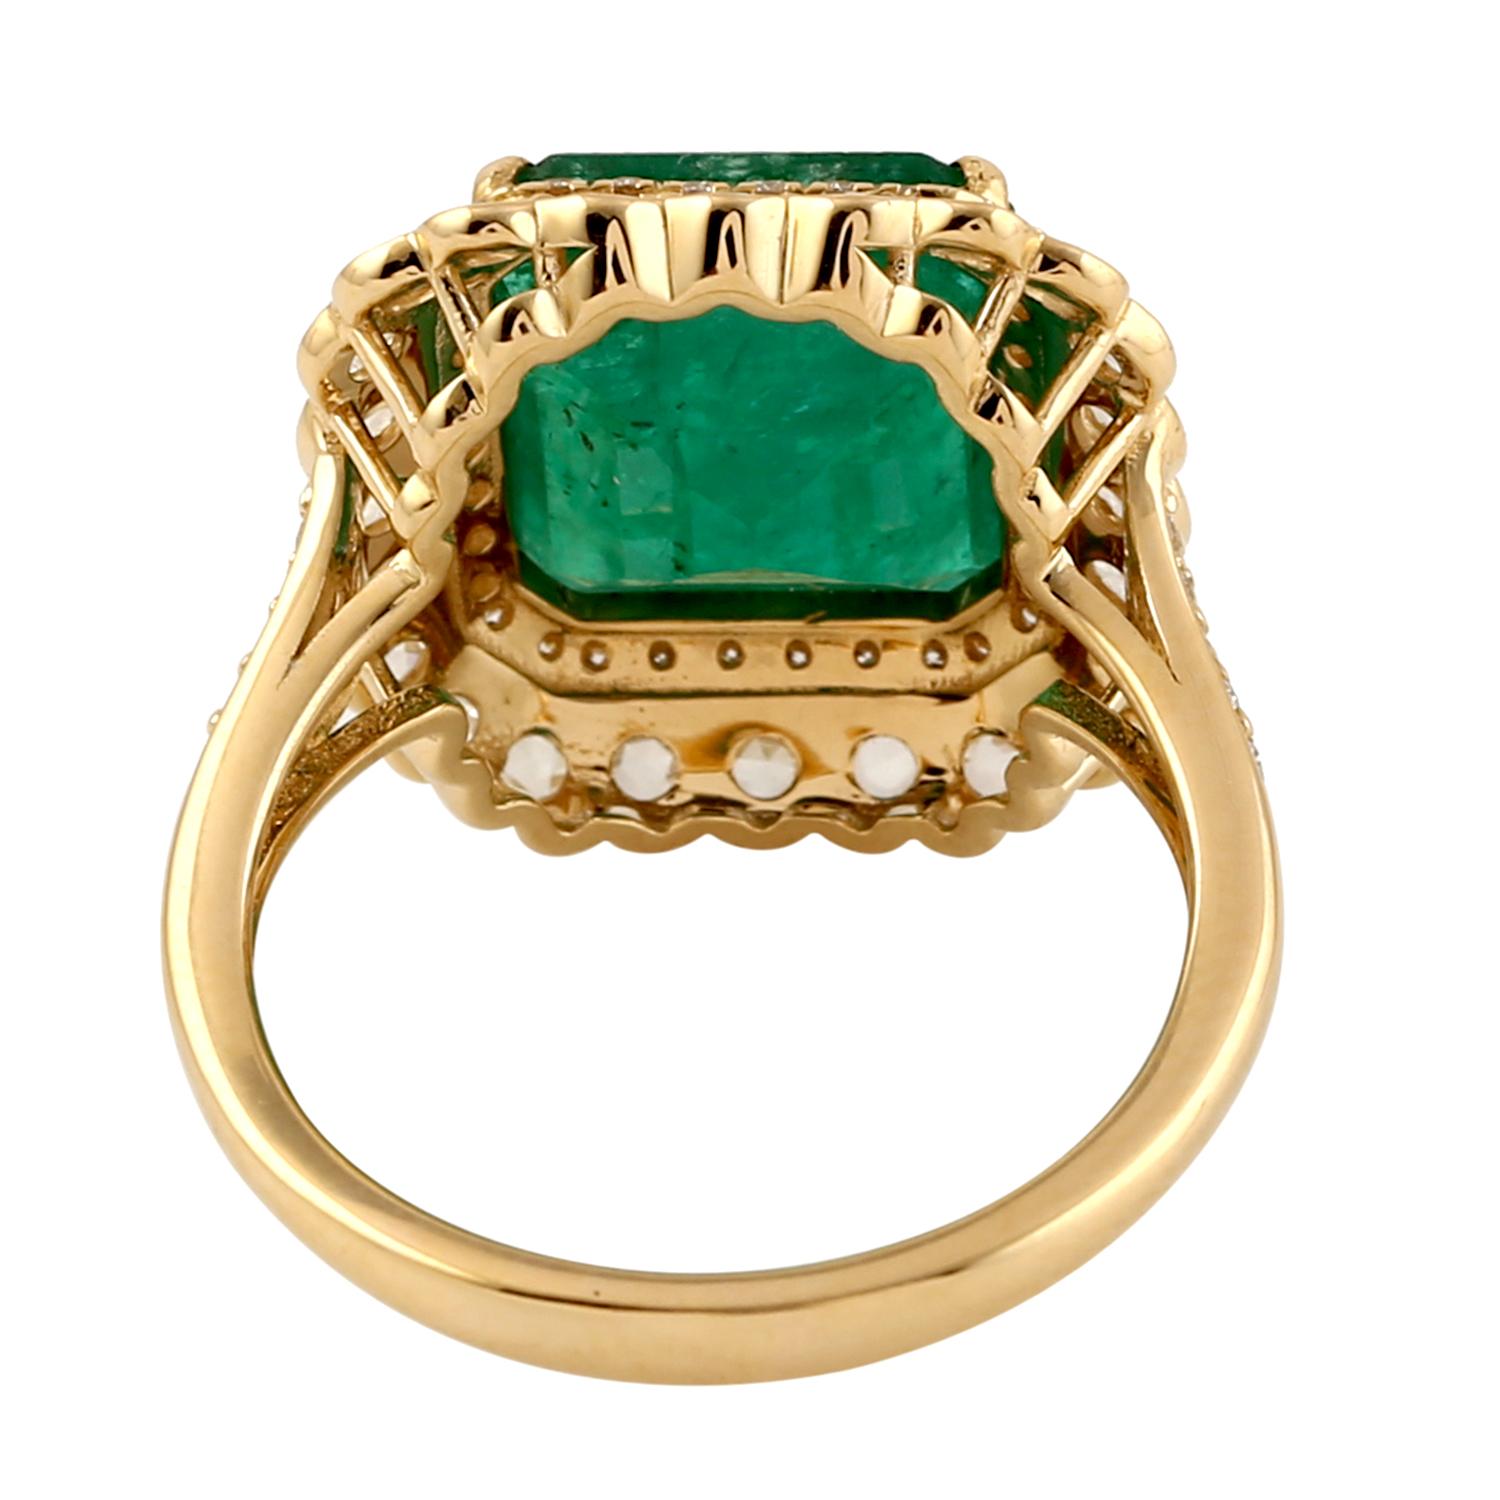 Octogen Shaped Zambian Emerald Cocktail Ring With Diamonds For Sale 1